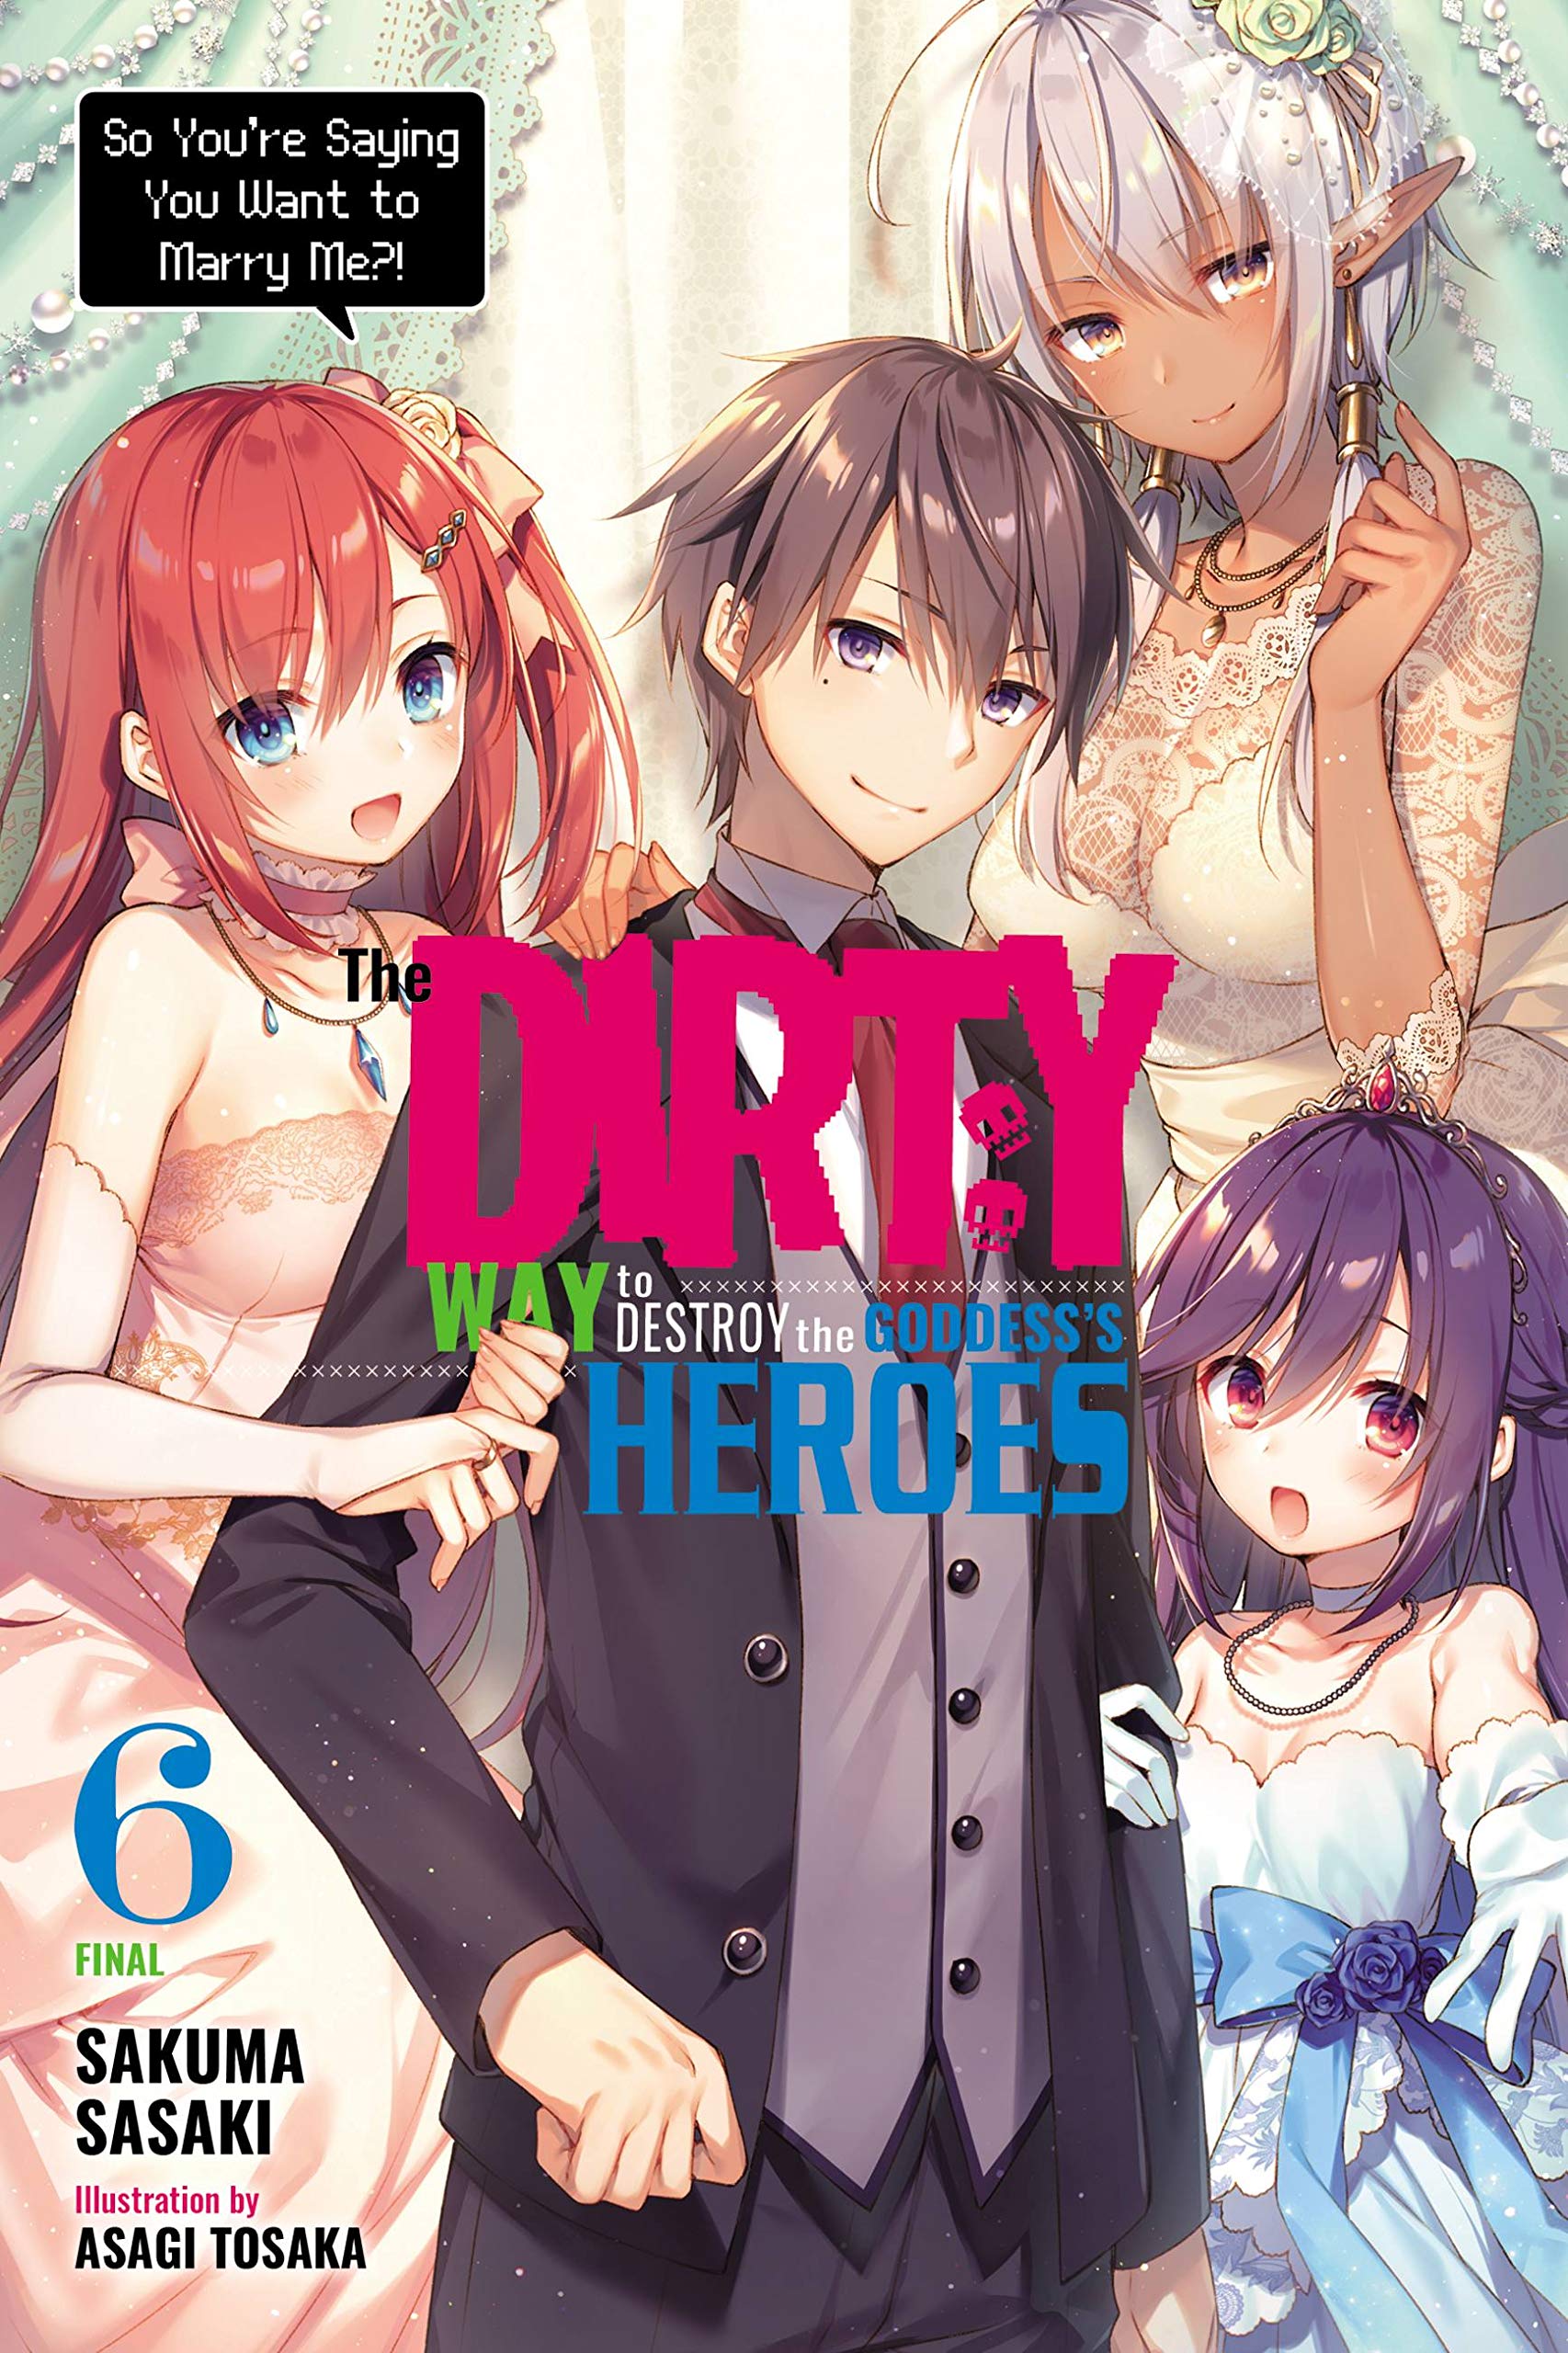 The Dirty Way to Destroy the Goddess&#039;s Heroes - Volume 6 (Light Novel)